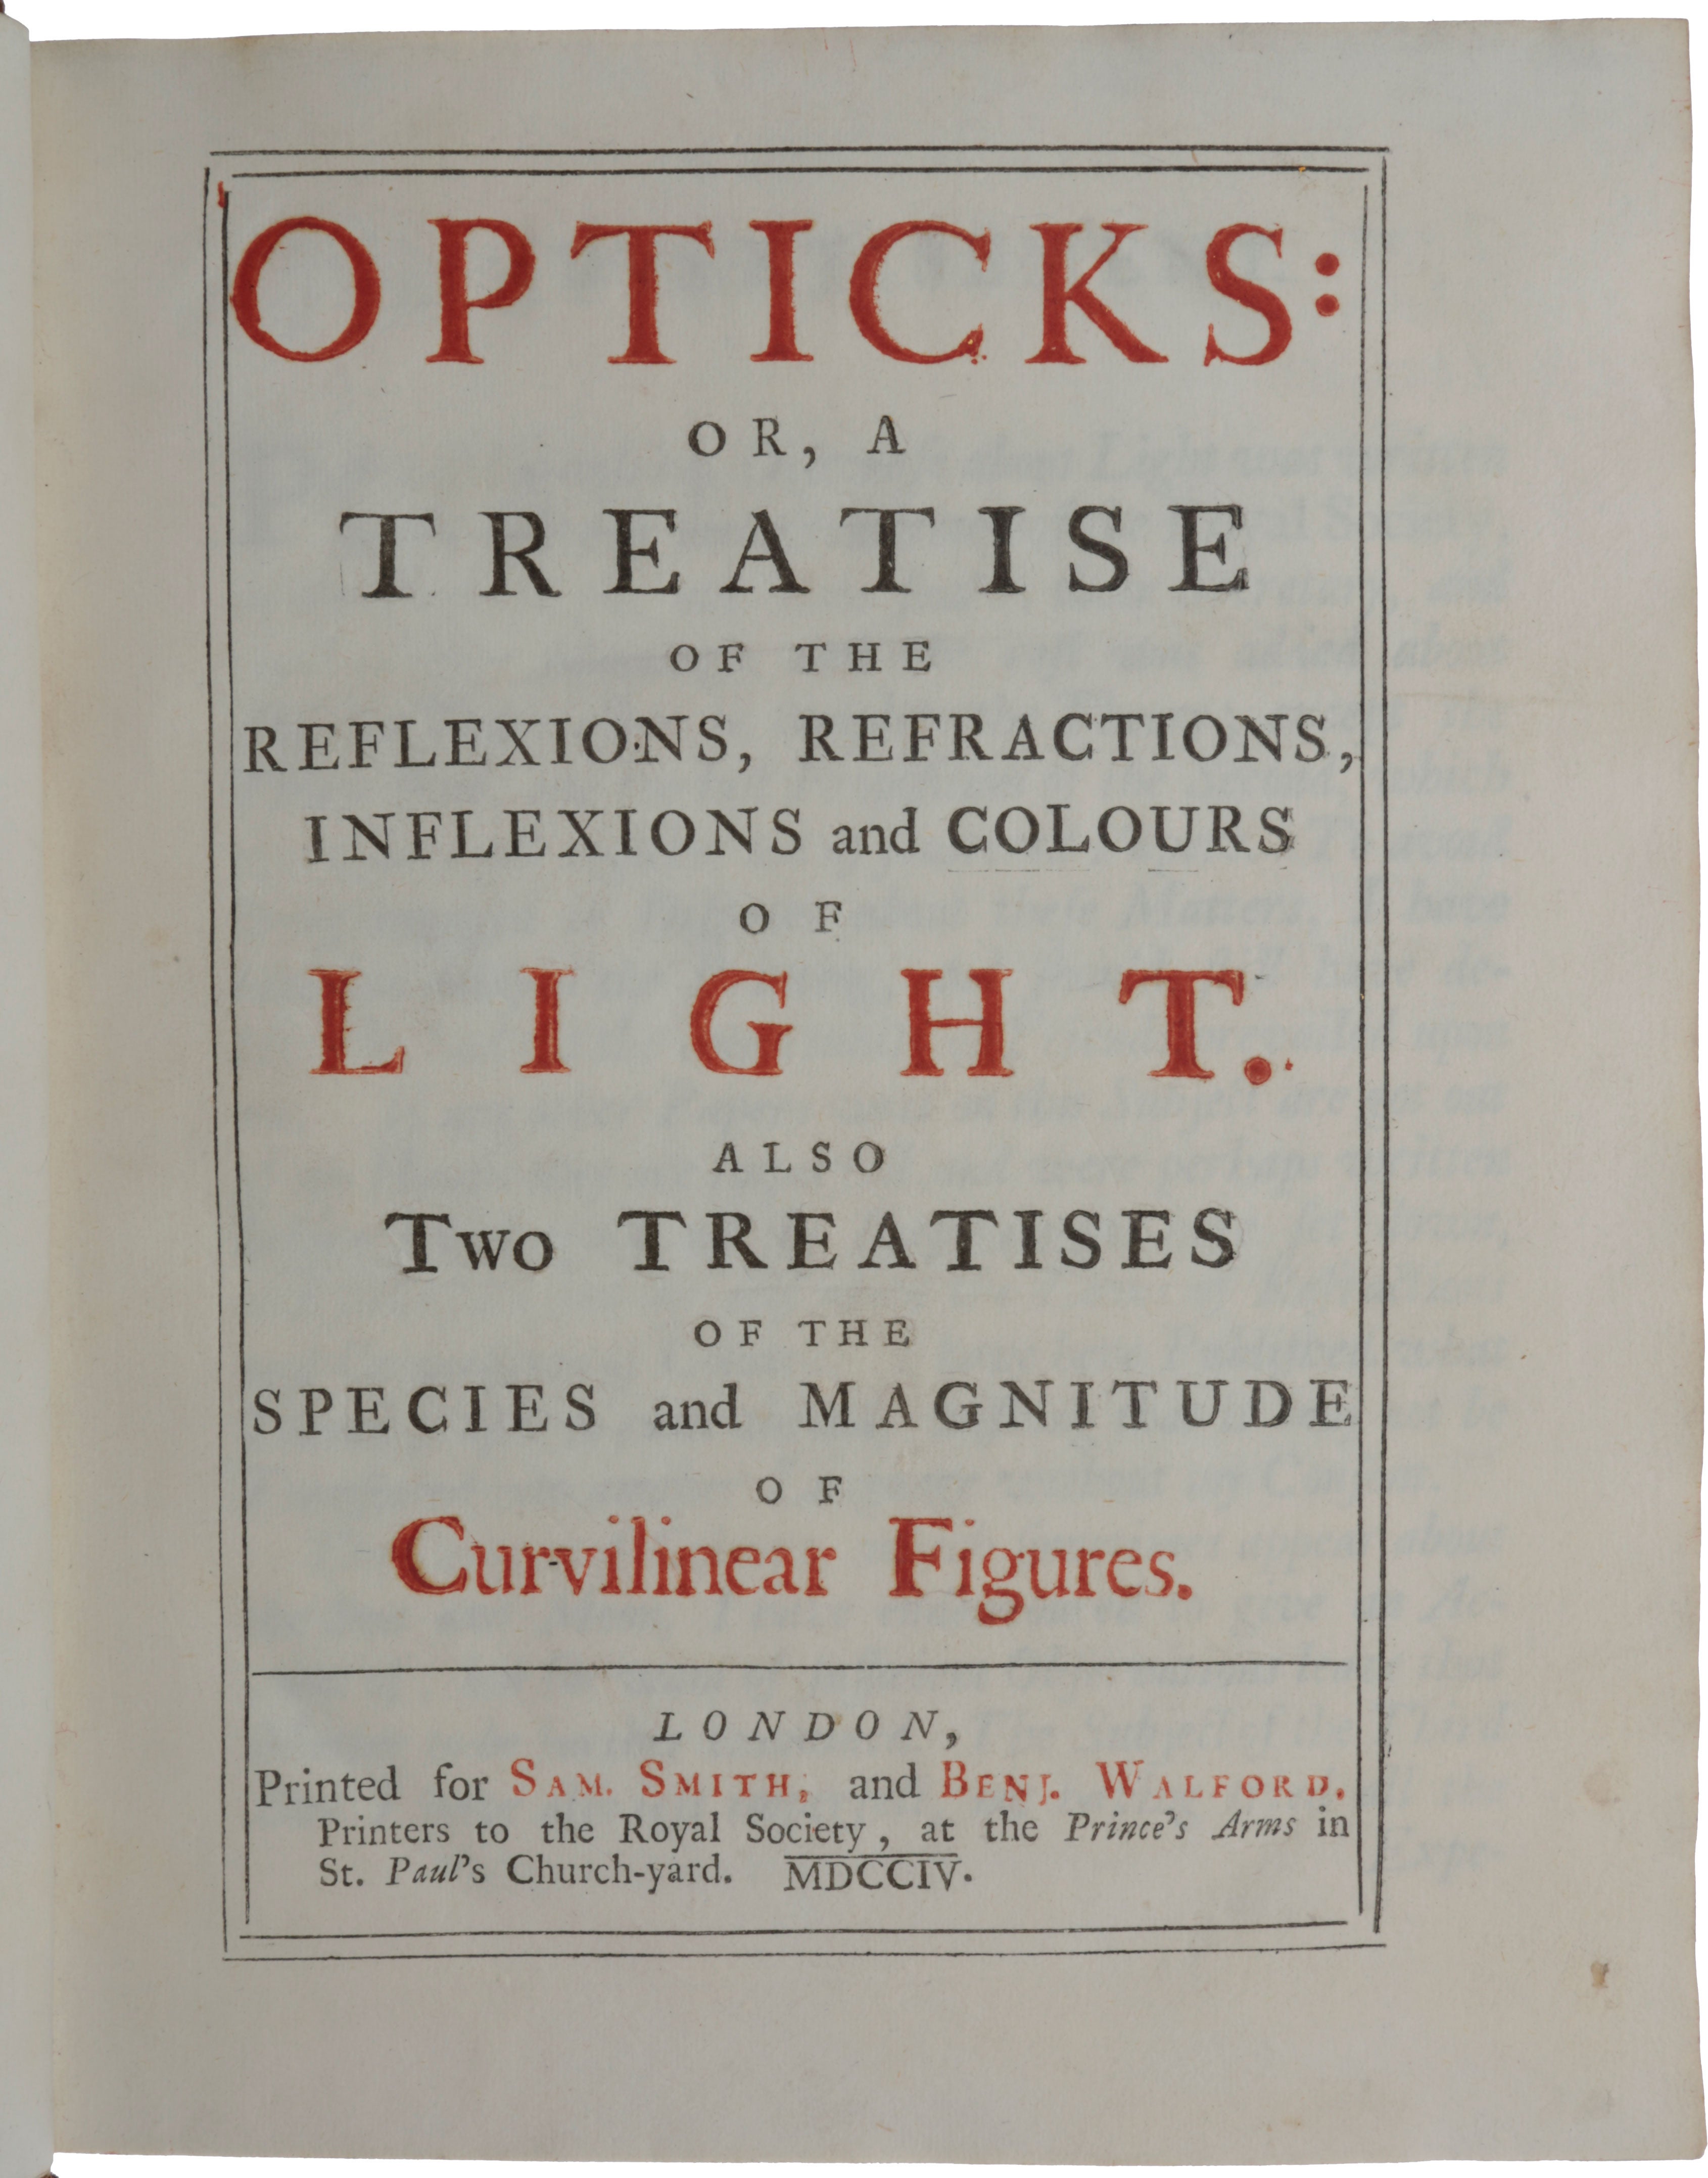 Item #5080 Opticks: or, A Treatise of the Reflexions, Refractions, Inflexions and Colours of Light. Also Two Treatises of the Species and Magnitude of Curvilinear Figures. Sir Isaac NEWTON.